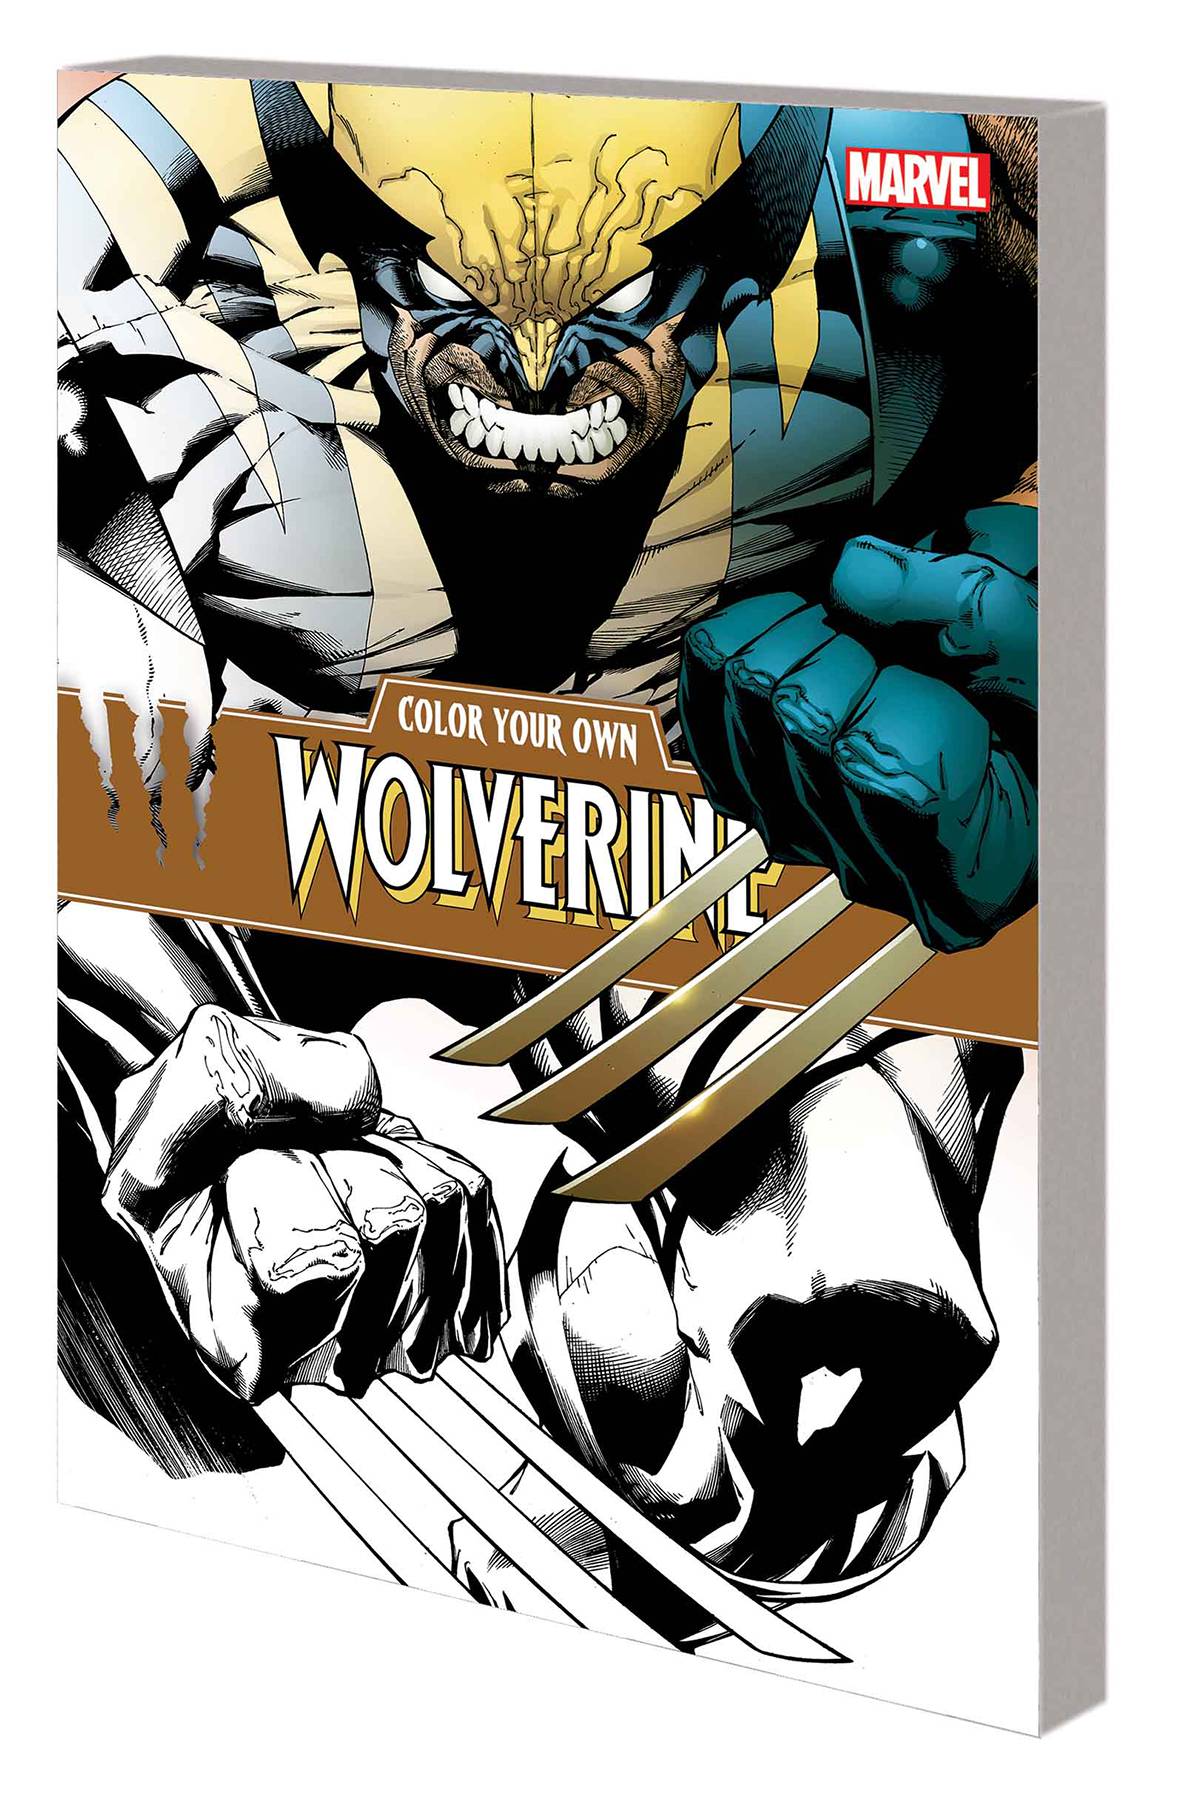 COLOR YOUR OWN WOLVERINE TP